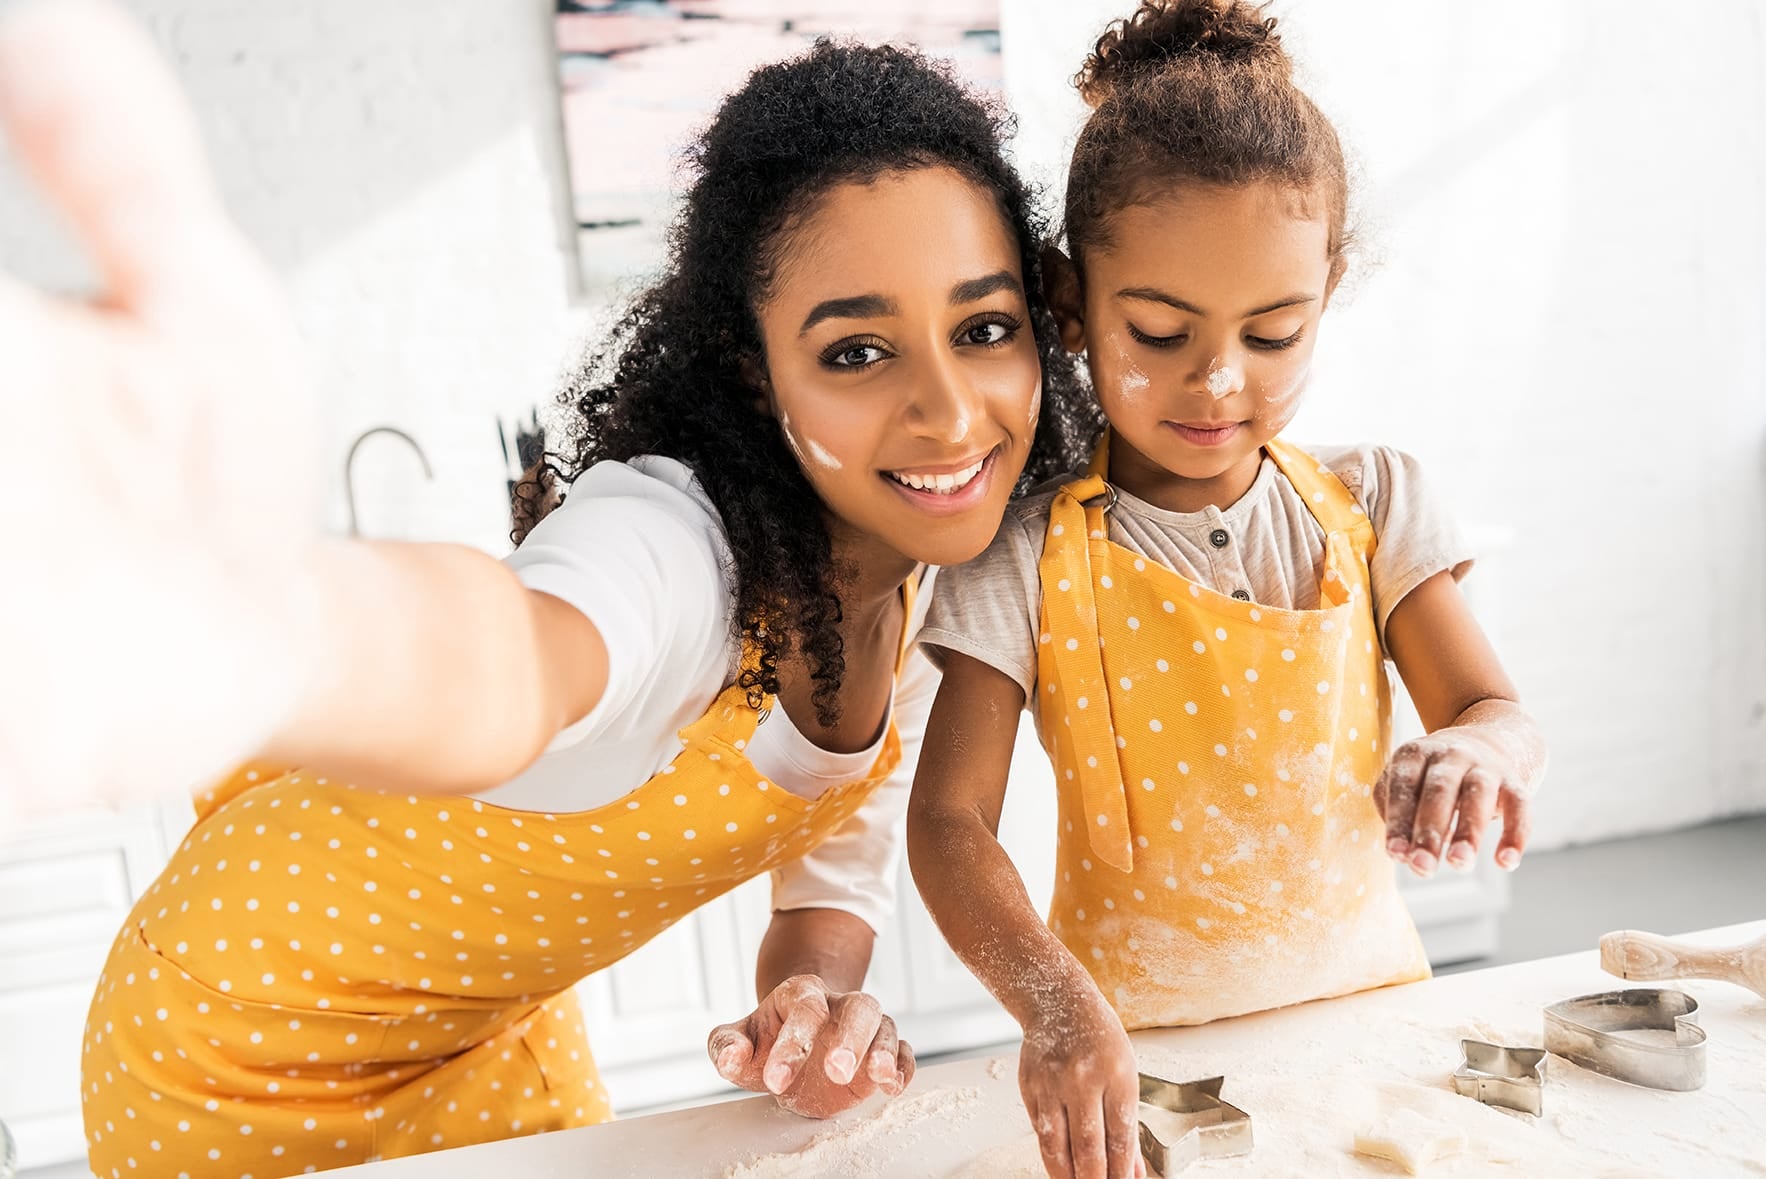 A woman and child spend quality time together in the kitchen